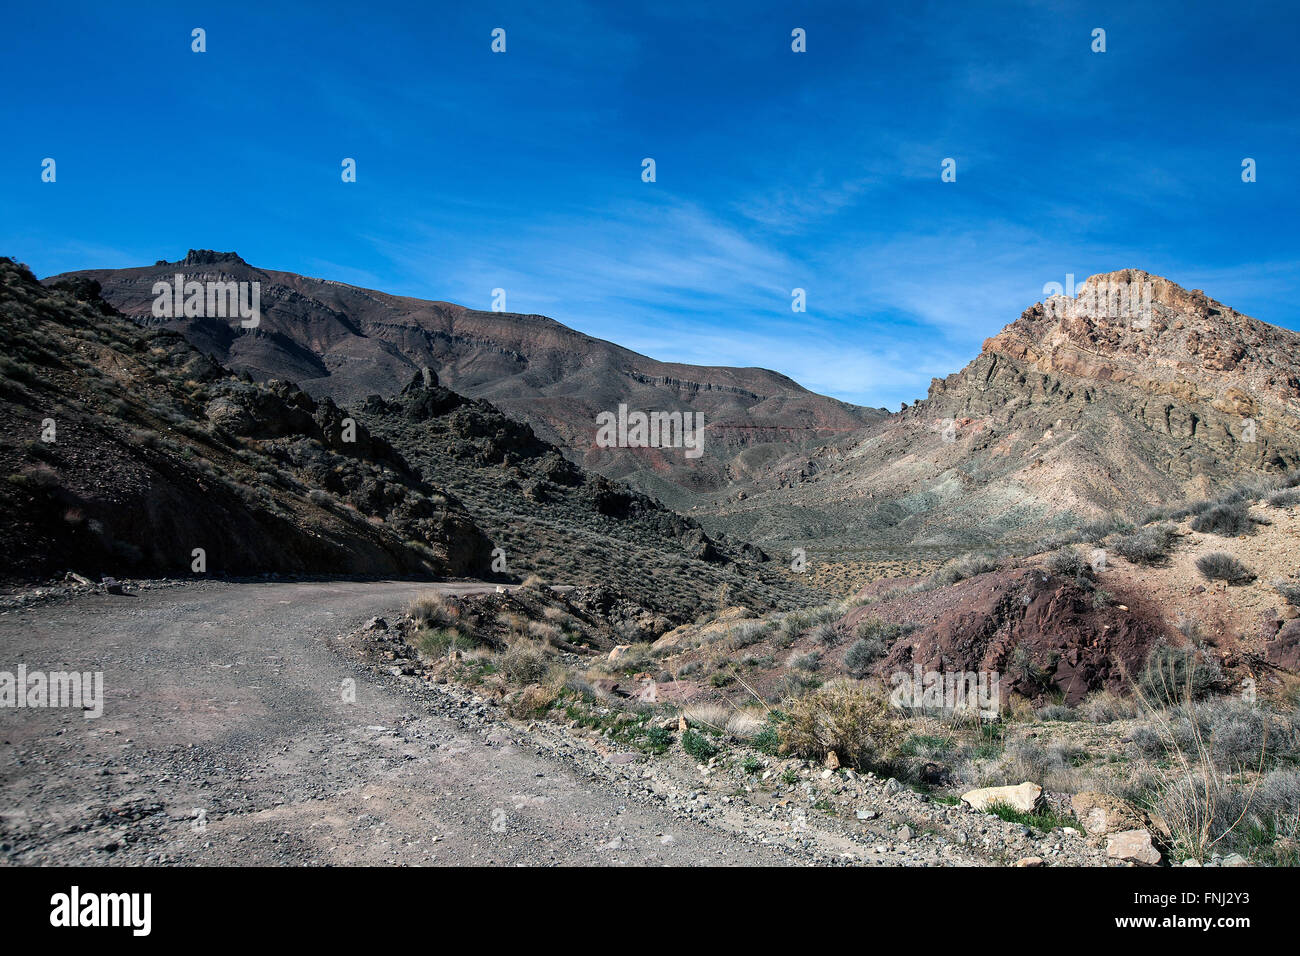 Titus Canyon Road, Death Valley National Park, California, United States of America Banque D'Images